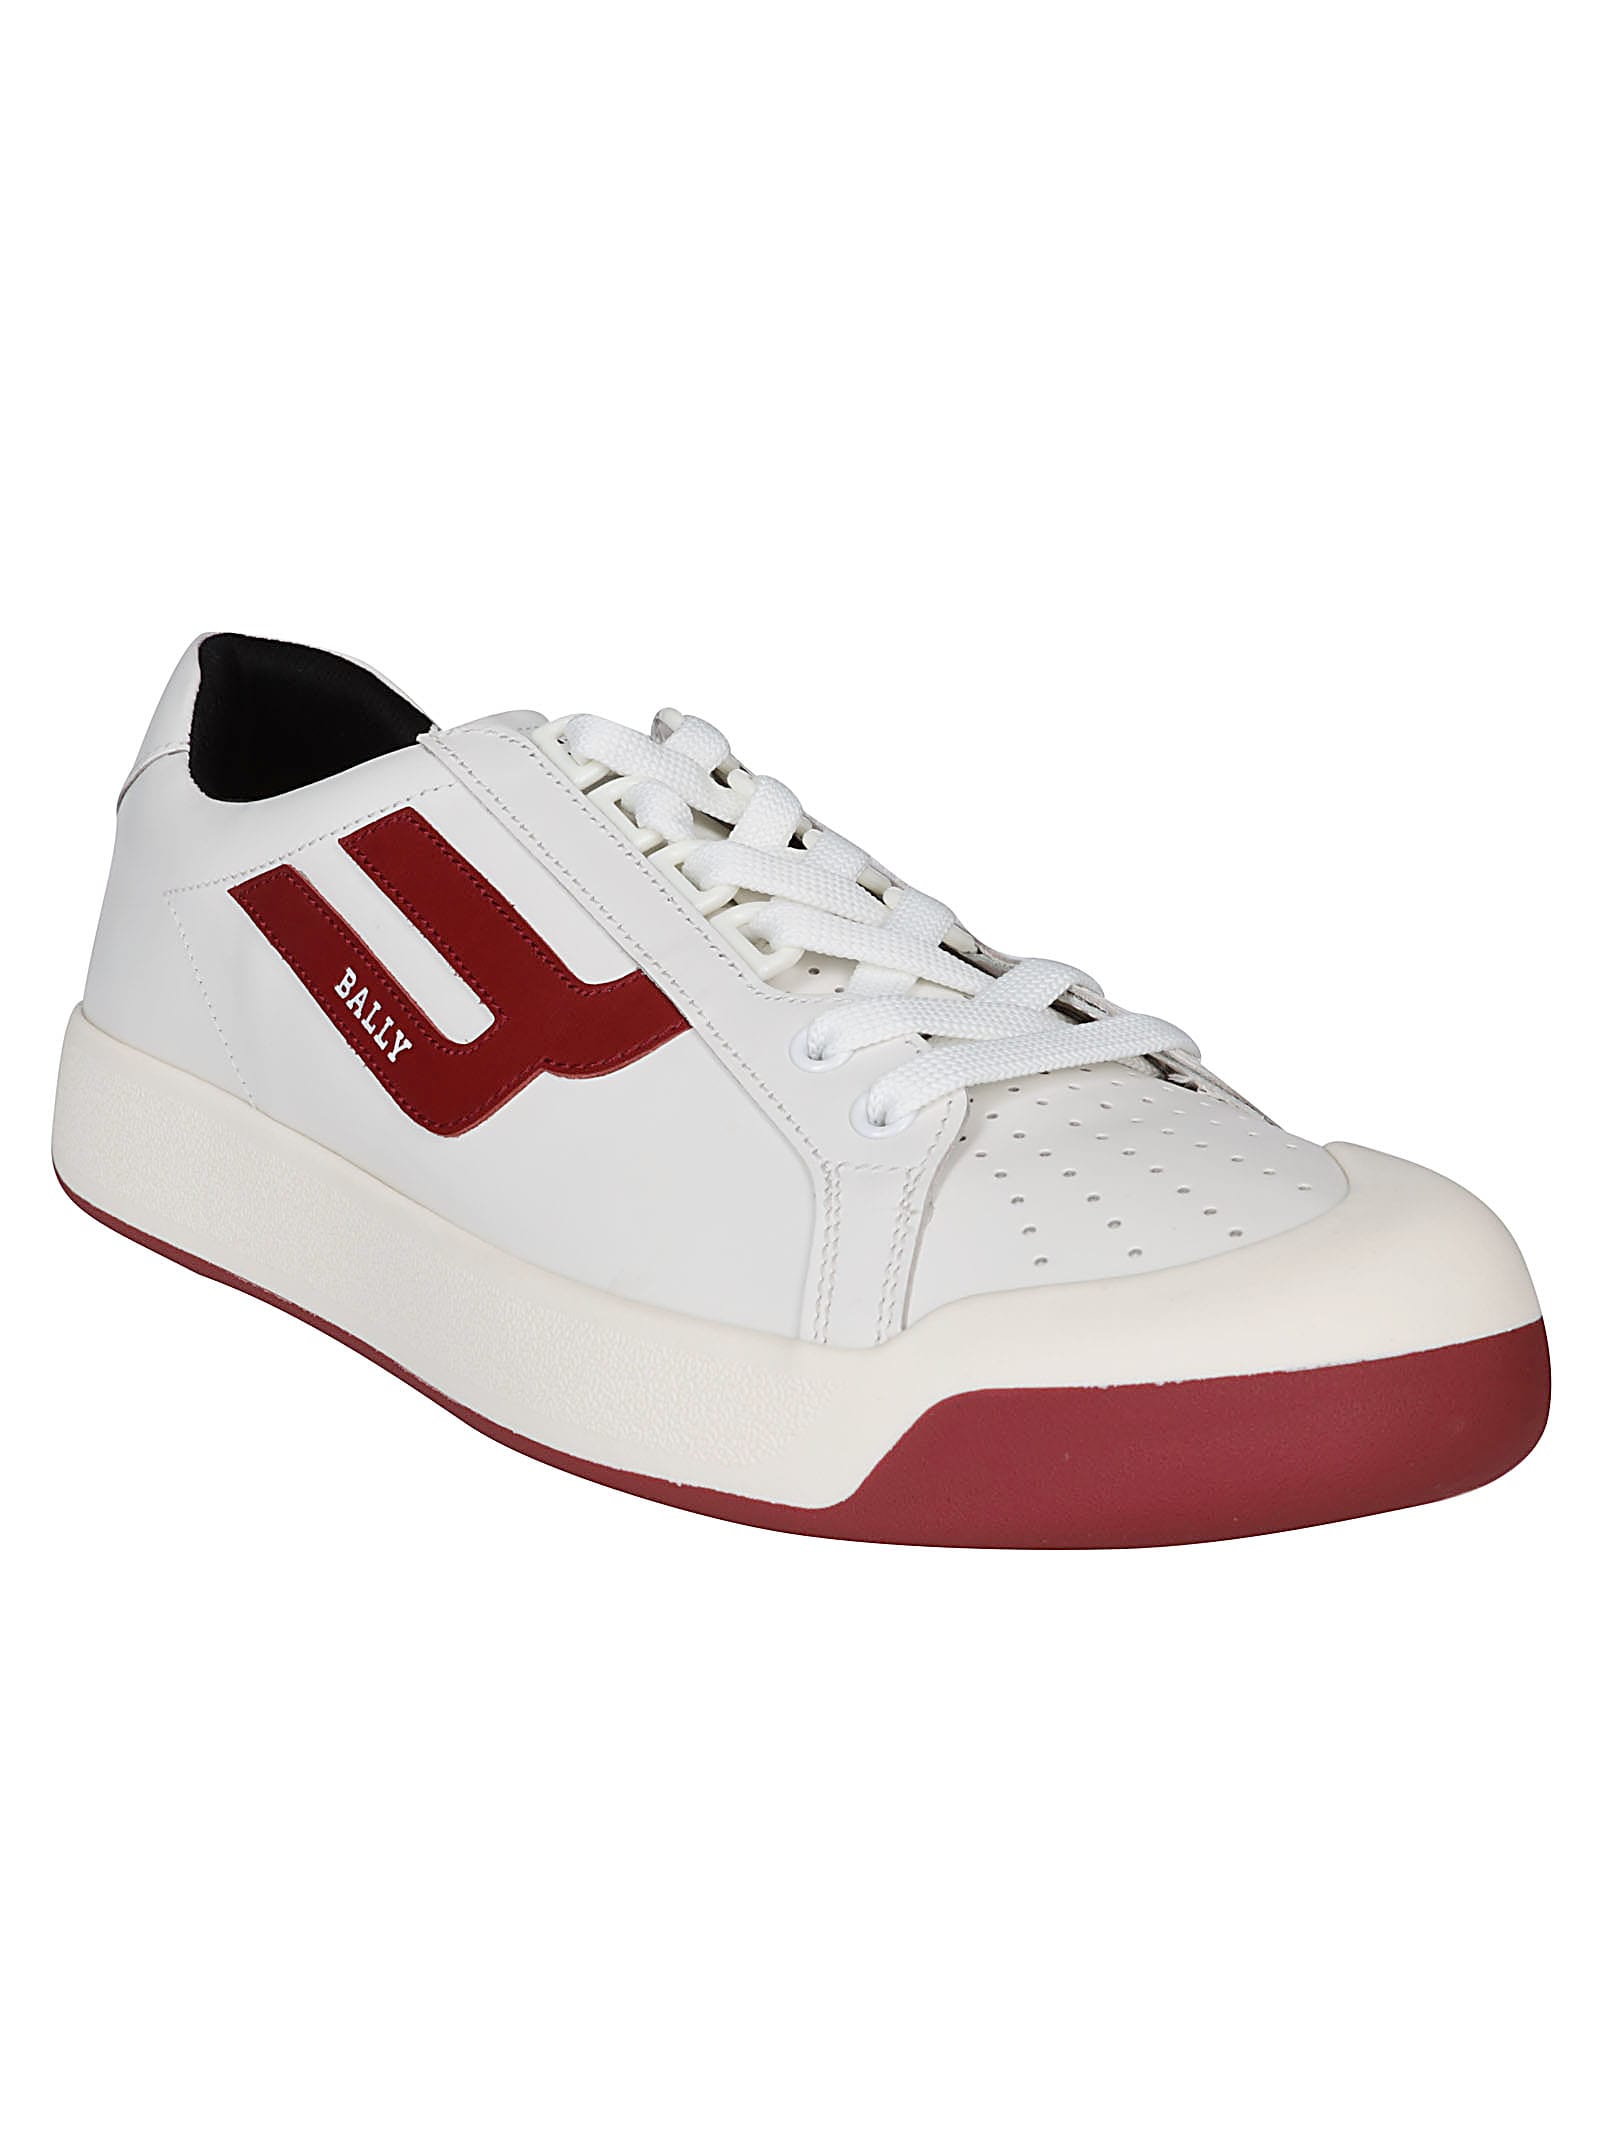 Bally Bally New Competition Sneaker - White red - 11069045 | italist